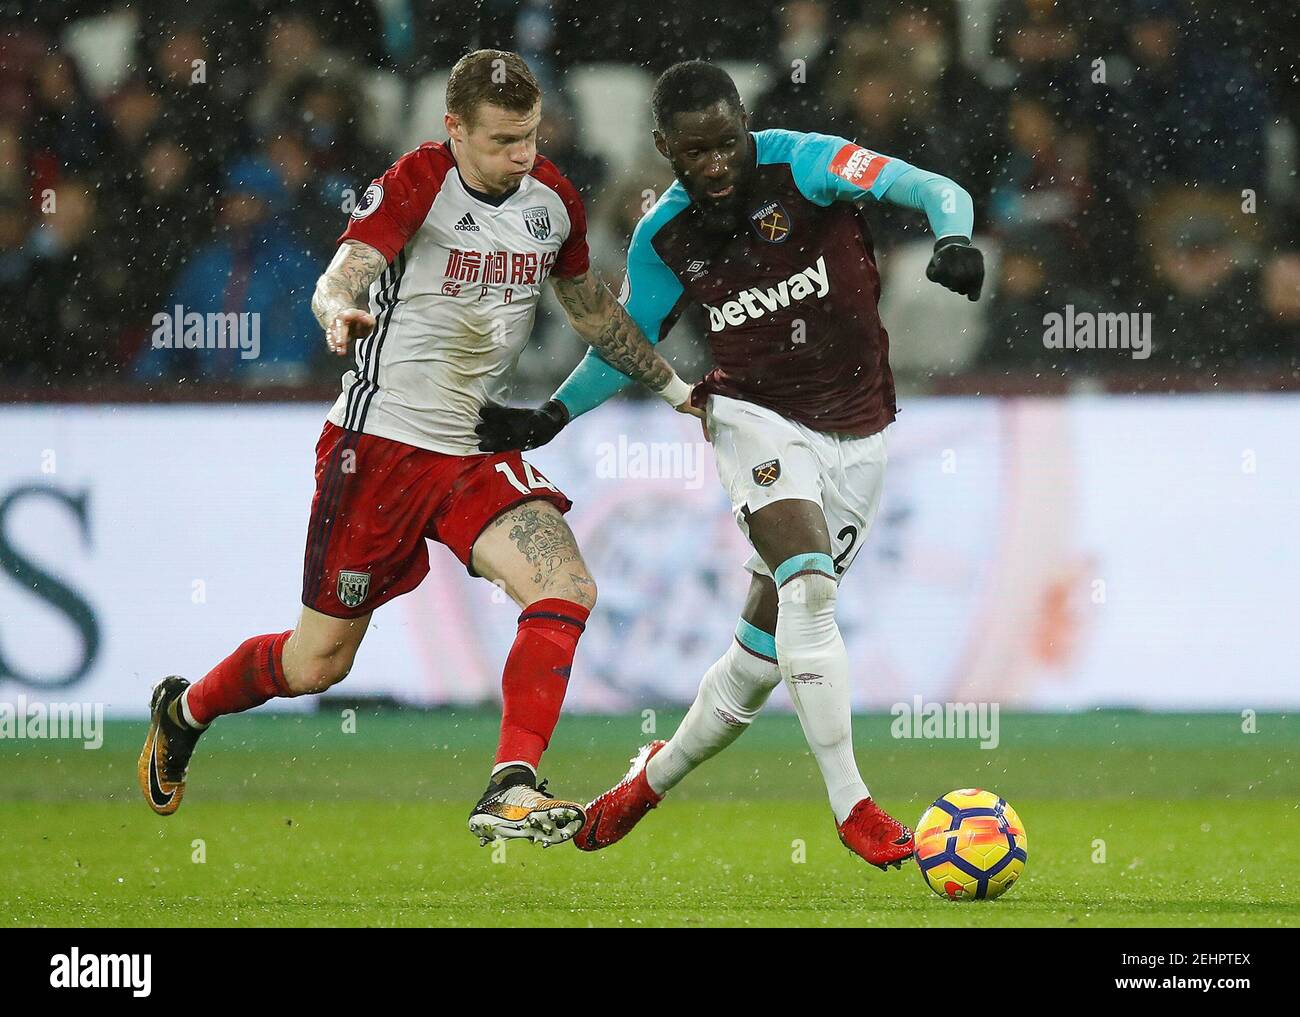 Soccer Football - Premier League - West Ham United vs West Bromwich Albion - London Stadium, London, Britain - January 2, 2018   West Ham United's Arthur Masuaku in action with West Bromwich Albion's James McClean    REUTERS/Eddie Keogh    EDITORIAL USE ONLY. No use with unauthorized audio, video, data, fixture lists, club/league logos or 'live' services. Online in-match use limited to 75 images, no video emulation. No use in betting, games or single club/league/player publications.  Please contact your account representative for further details. Stock Photo